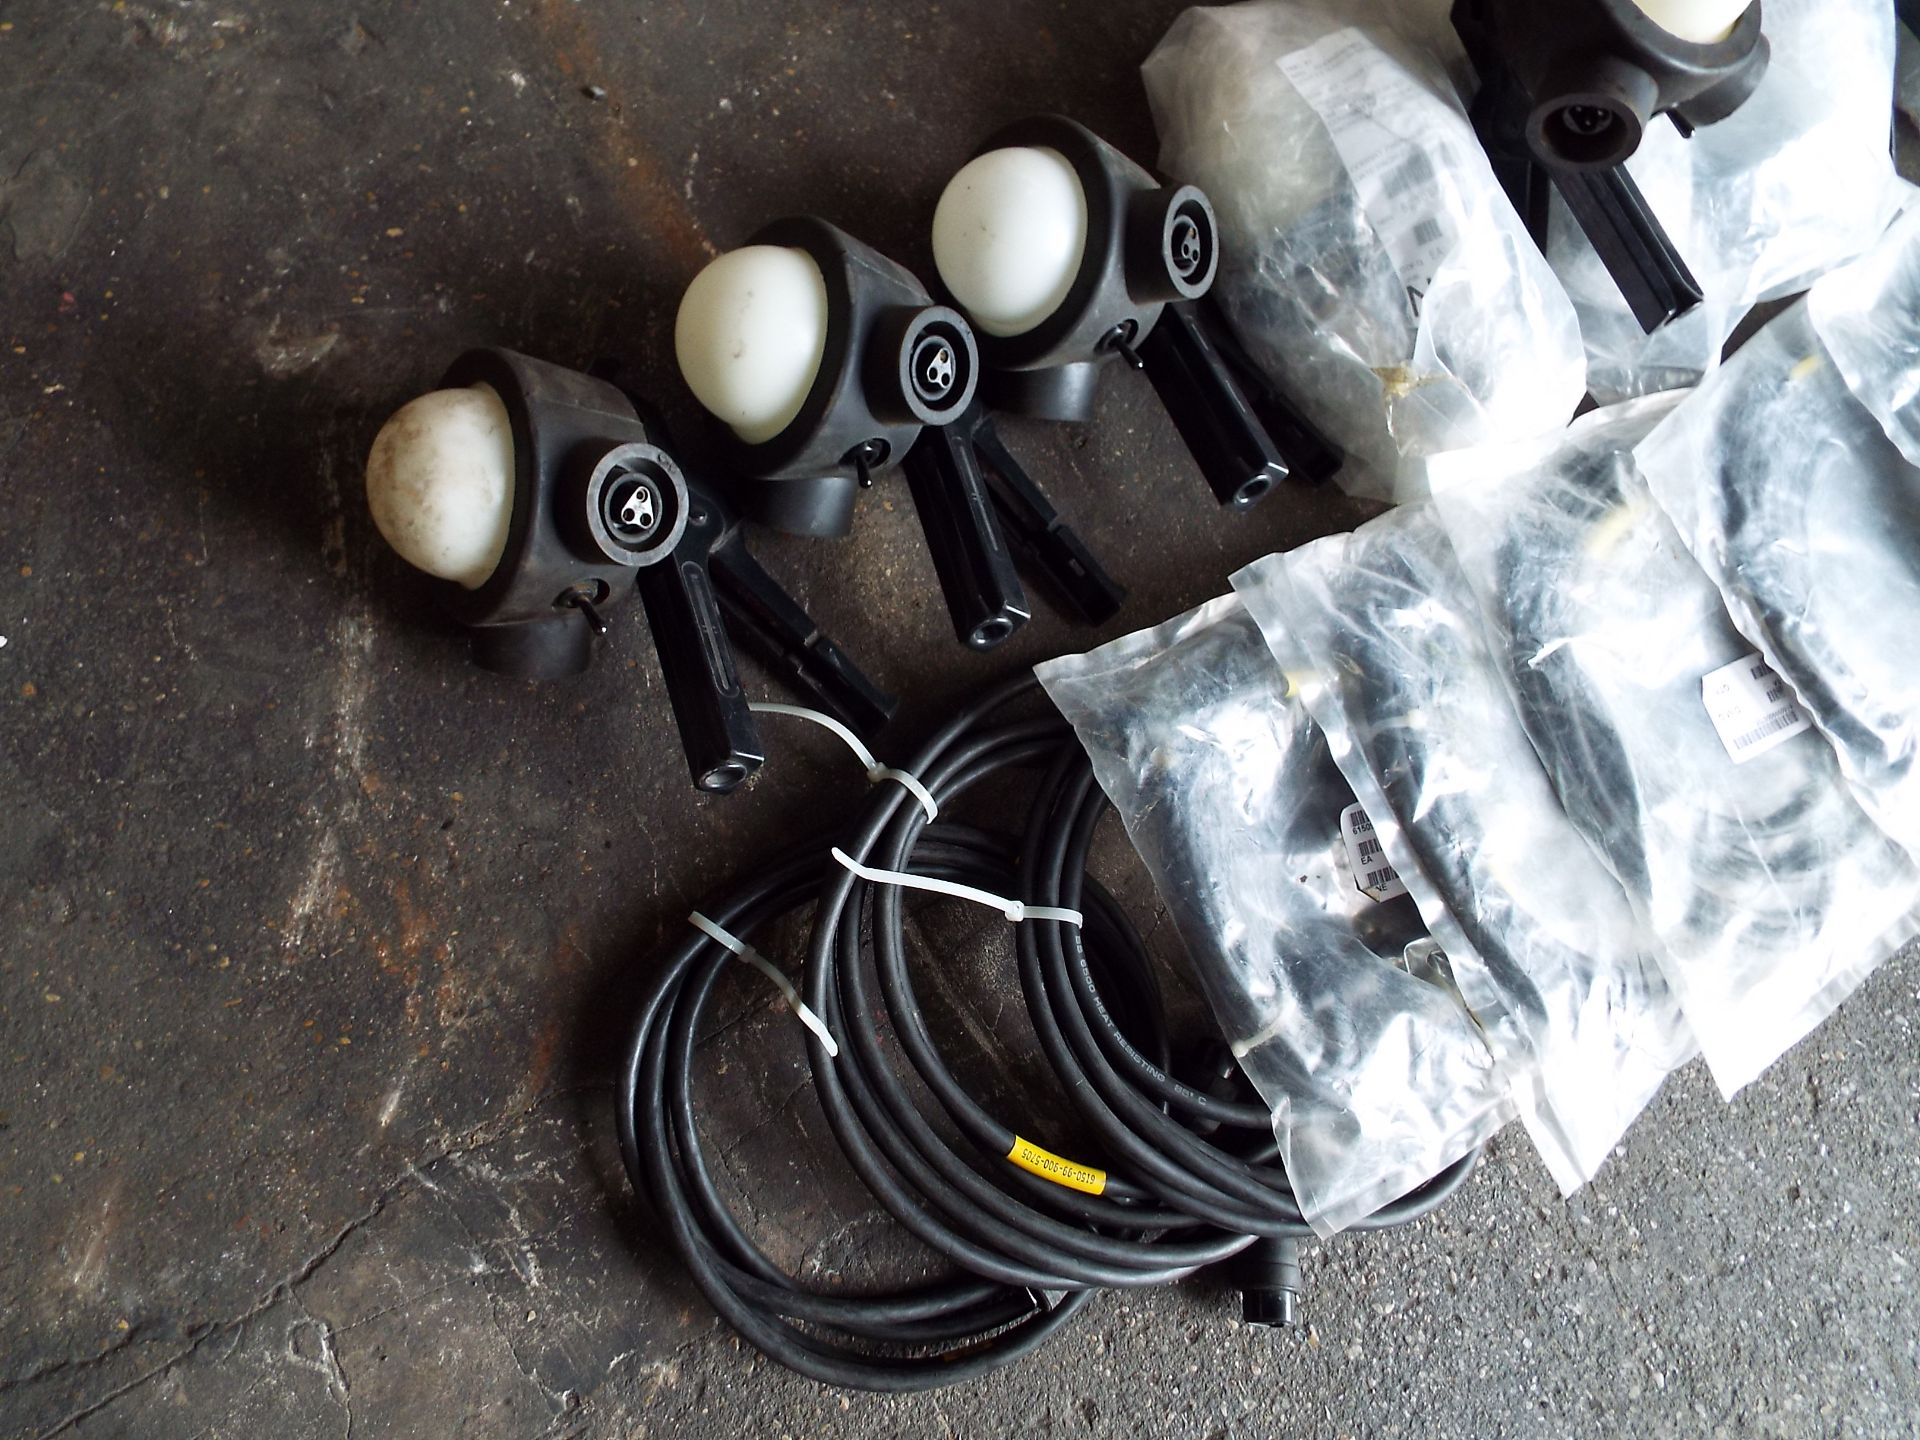 12 x Smith and Prince Gripper Work Lights with Cables - Image 2 of 10